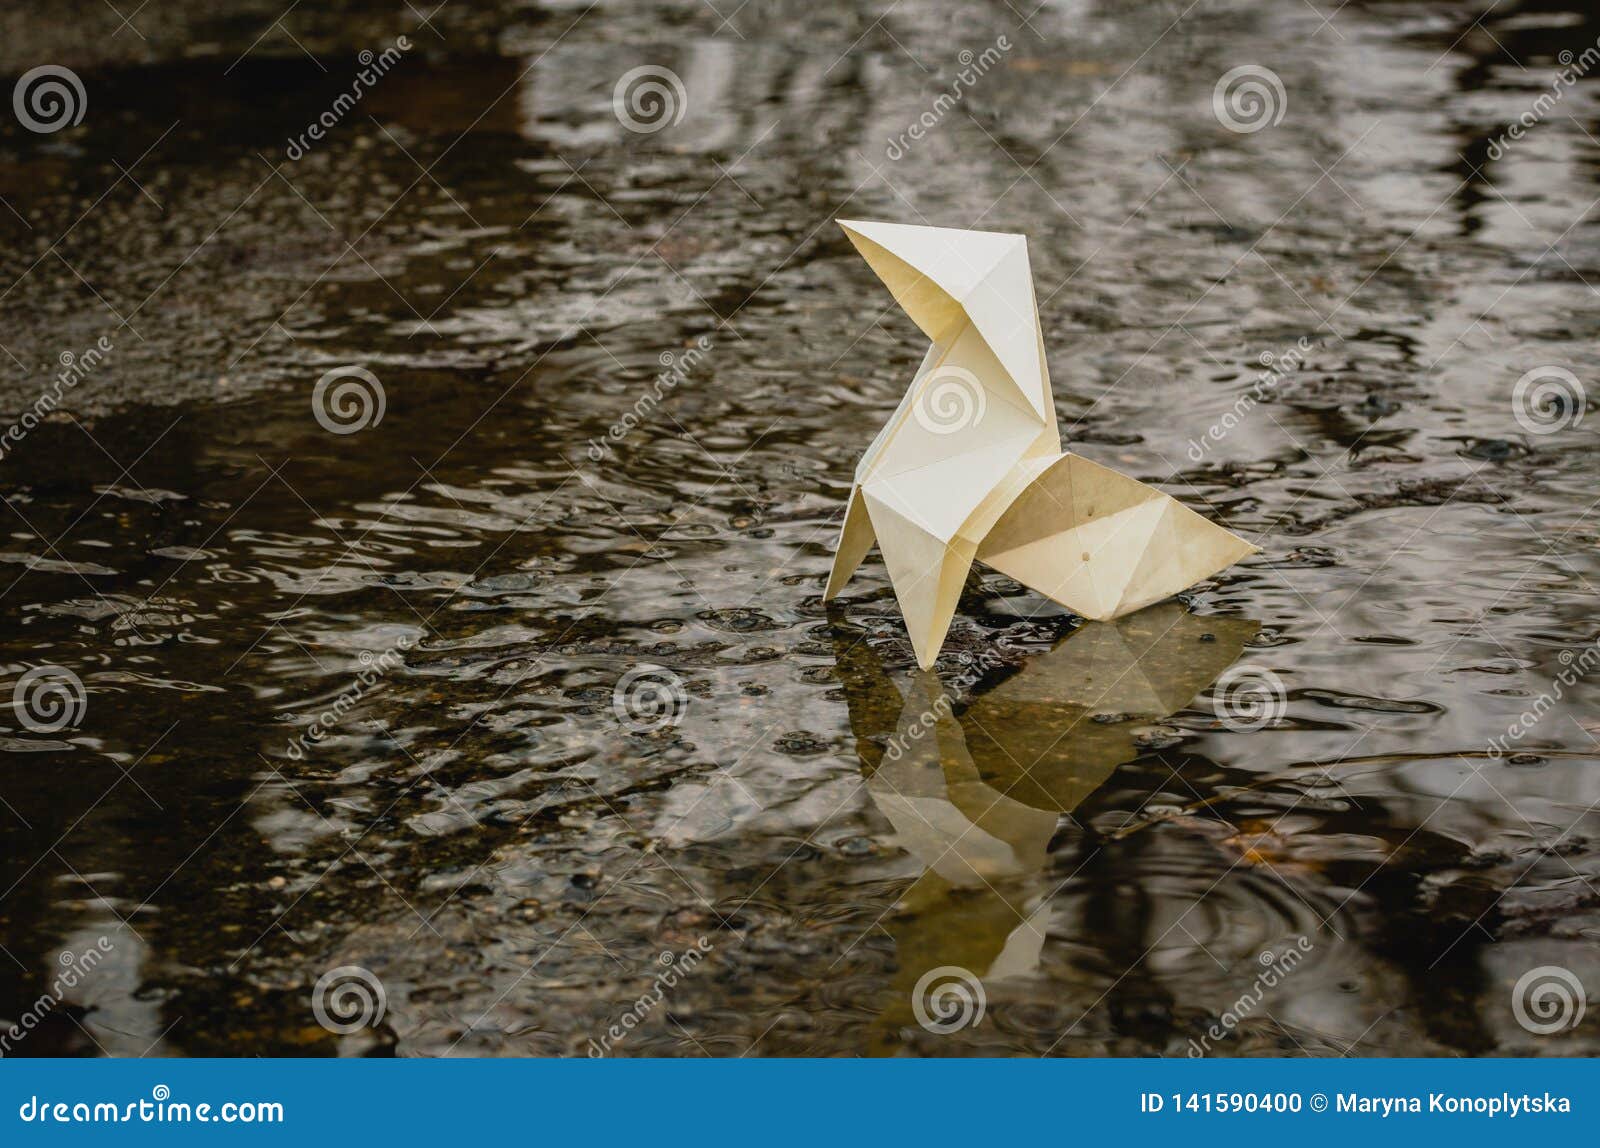 origami paper figure on the background of a gloomy city street and puddles